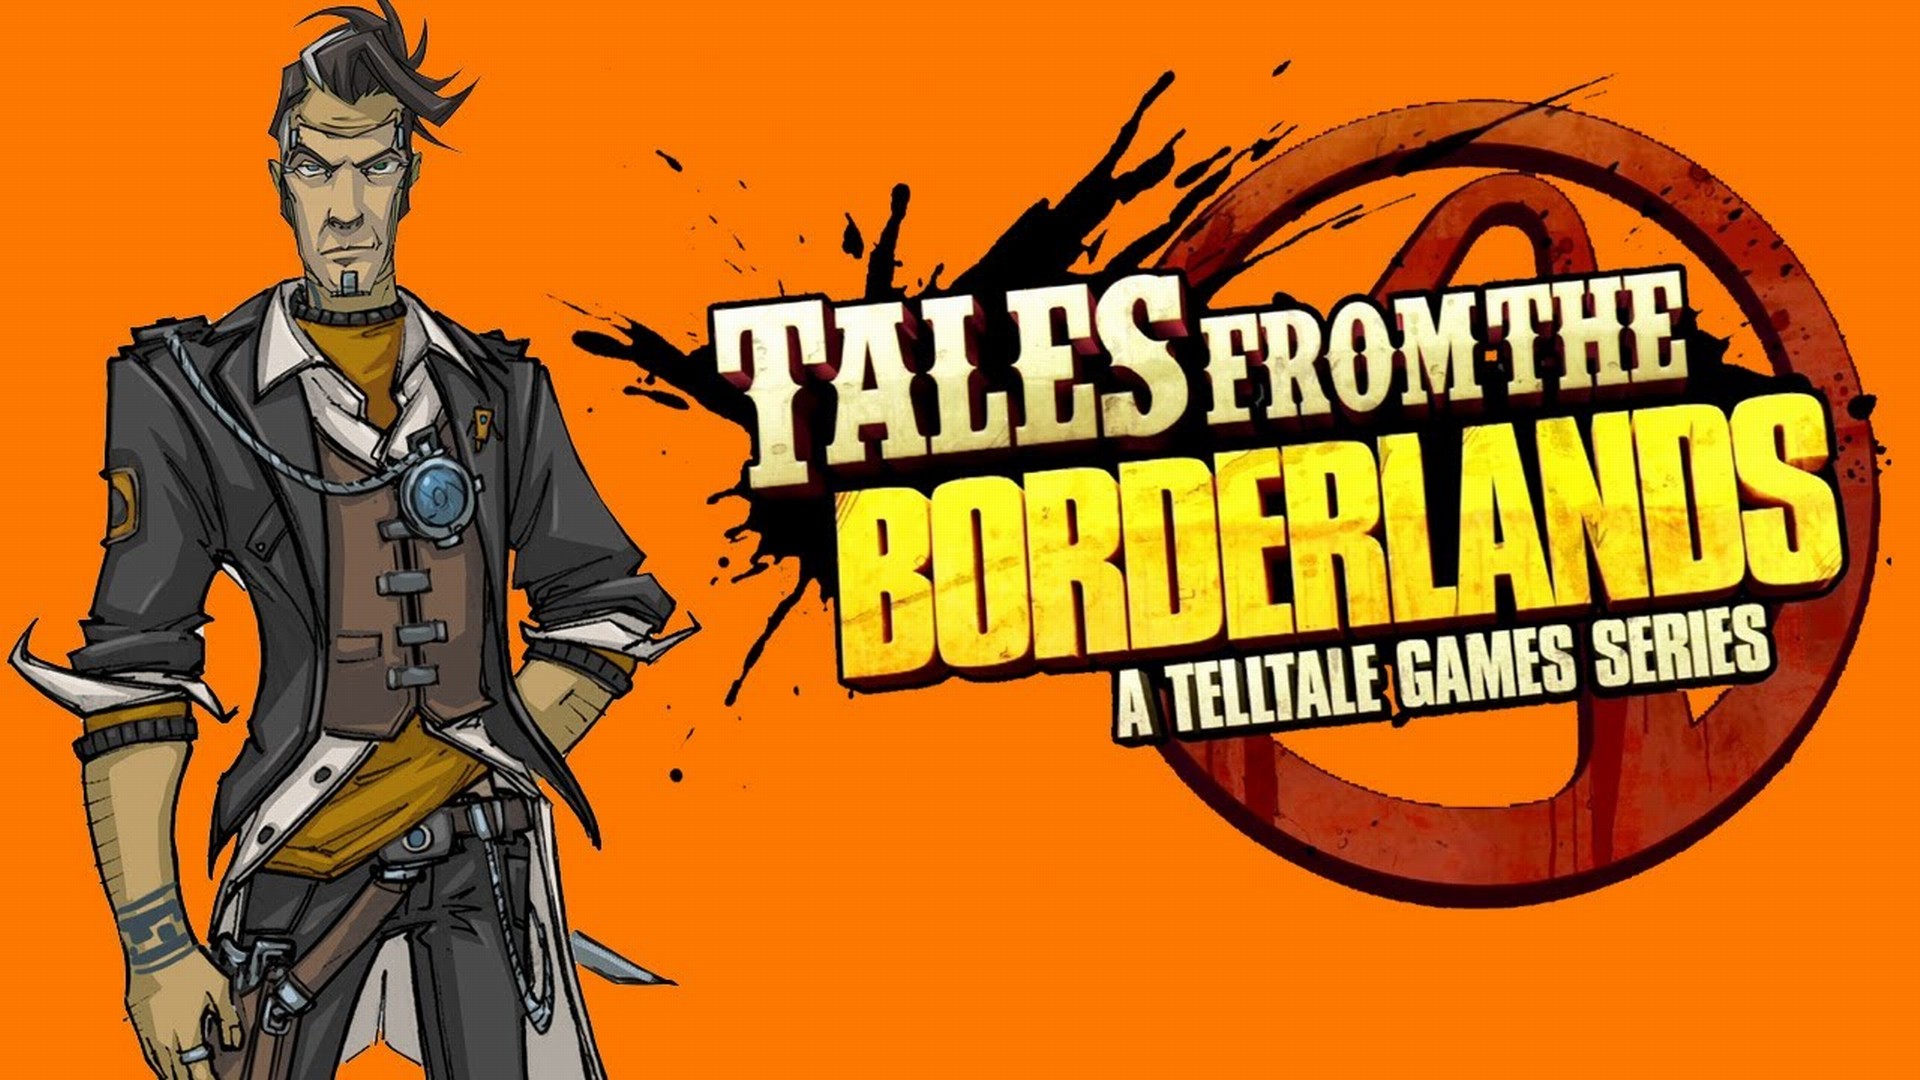 tales from the borderlands wallpaper,action adventure game,pc game,cartoon,games,poster